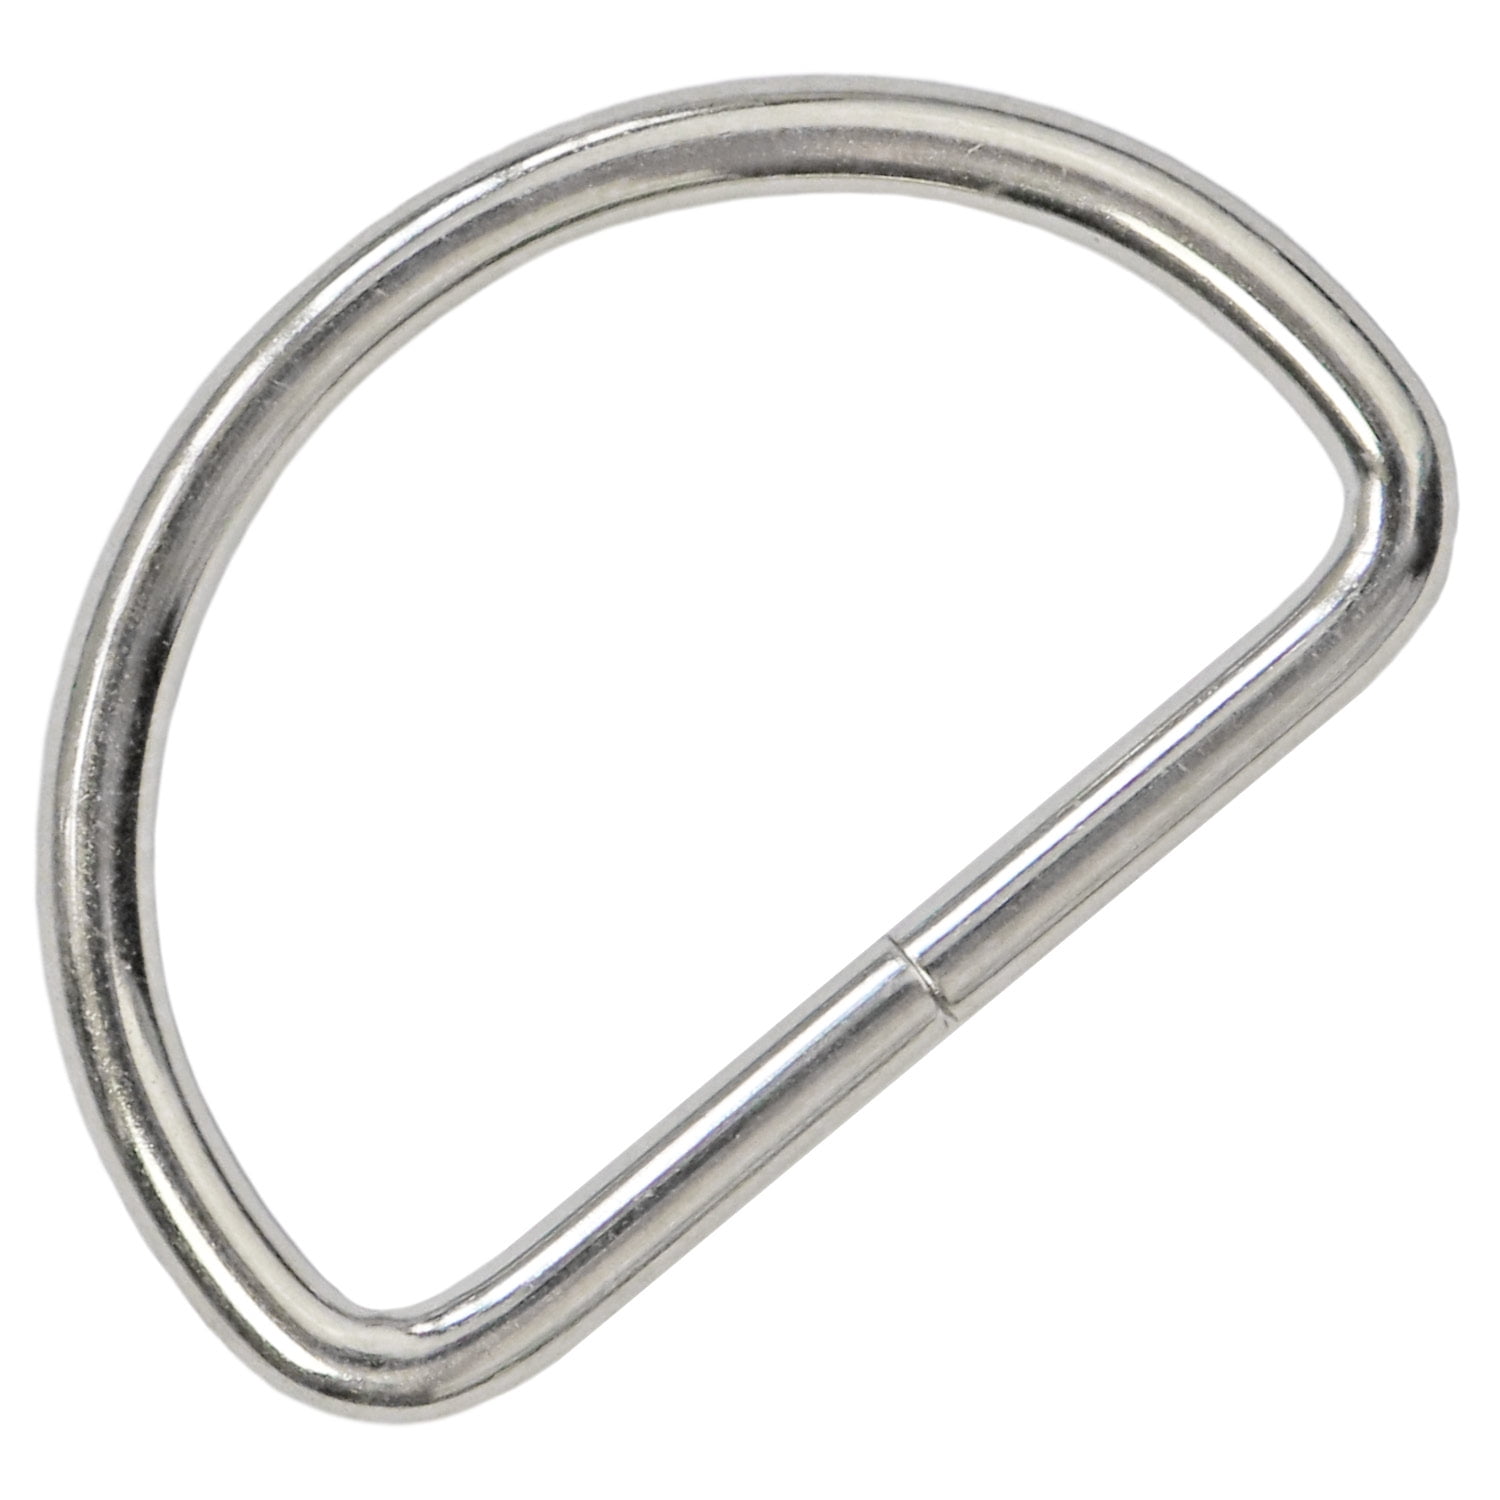 CrocSee Metal D Ring 1 inch Non Welded Nickel Plated Pack of 100 (Large)